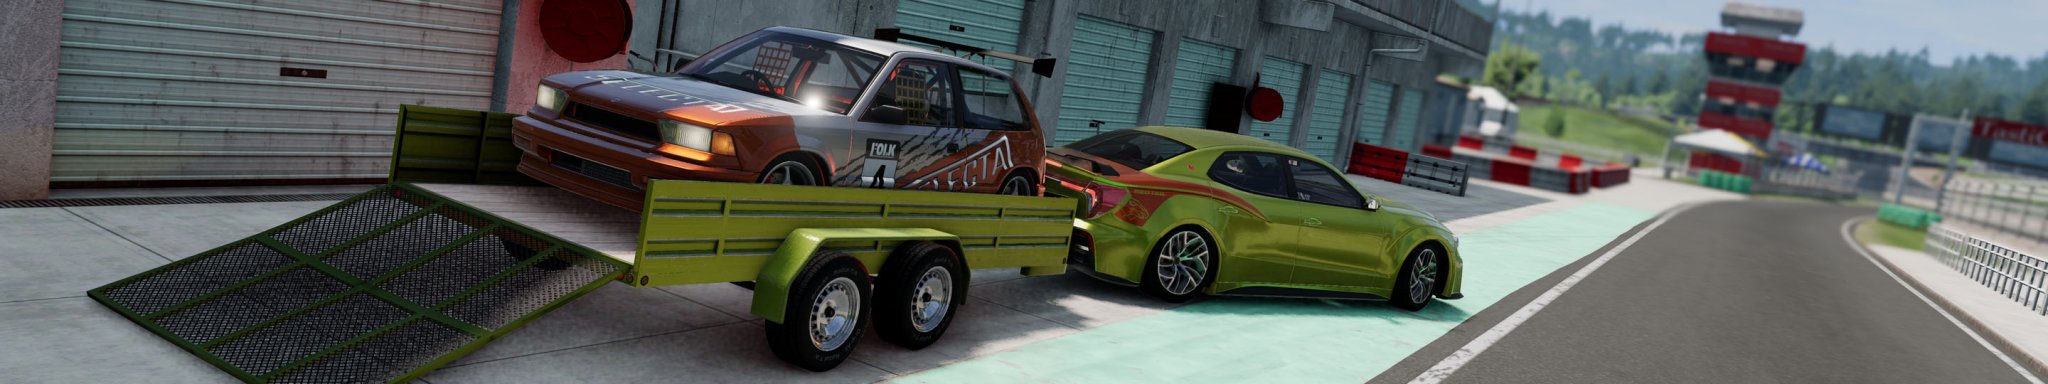 2 BeamNG TRACK CAR and TRAILER copy.jpg